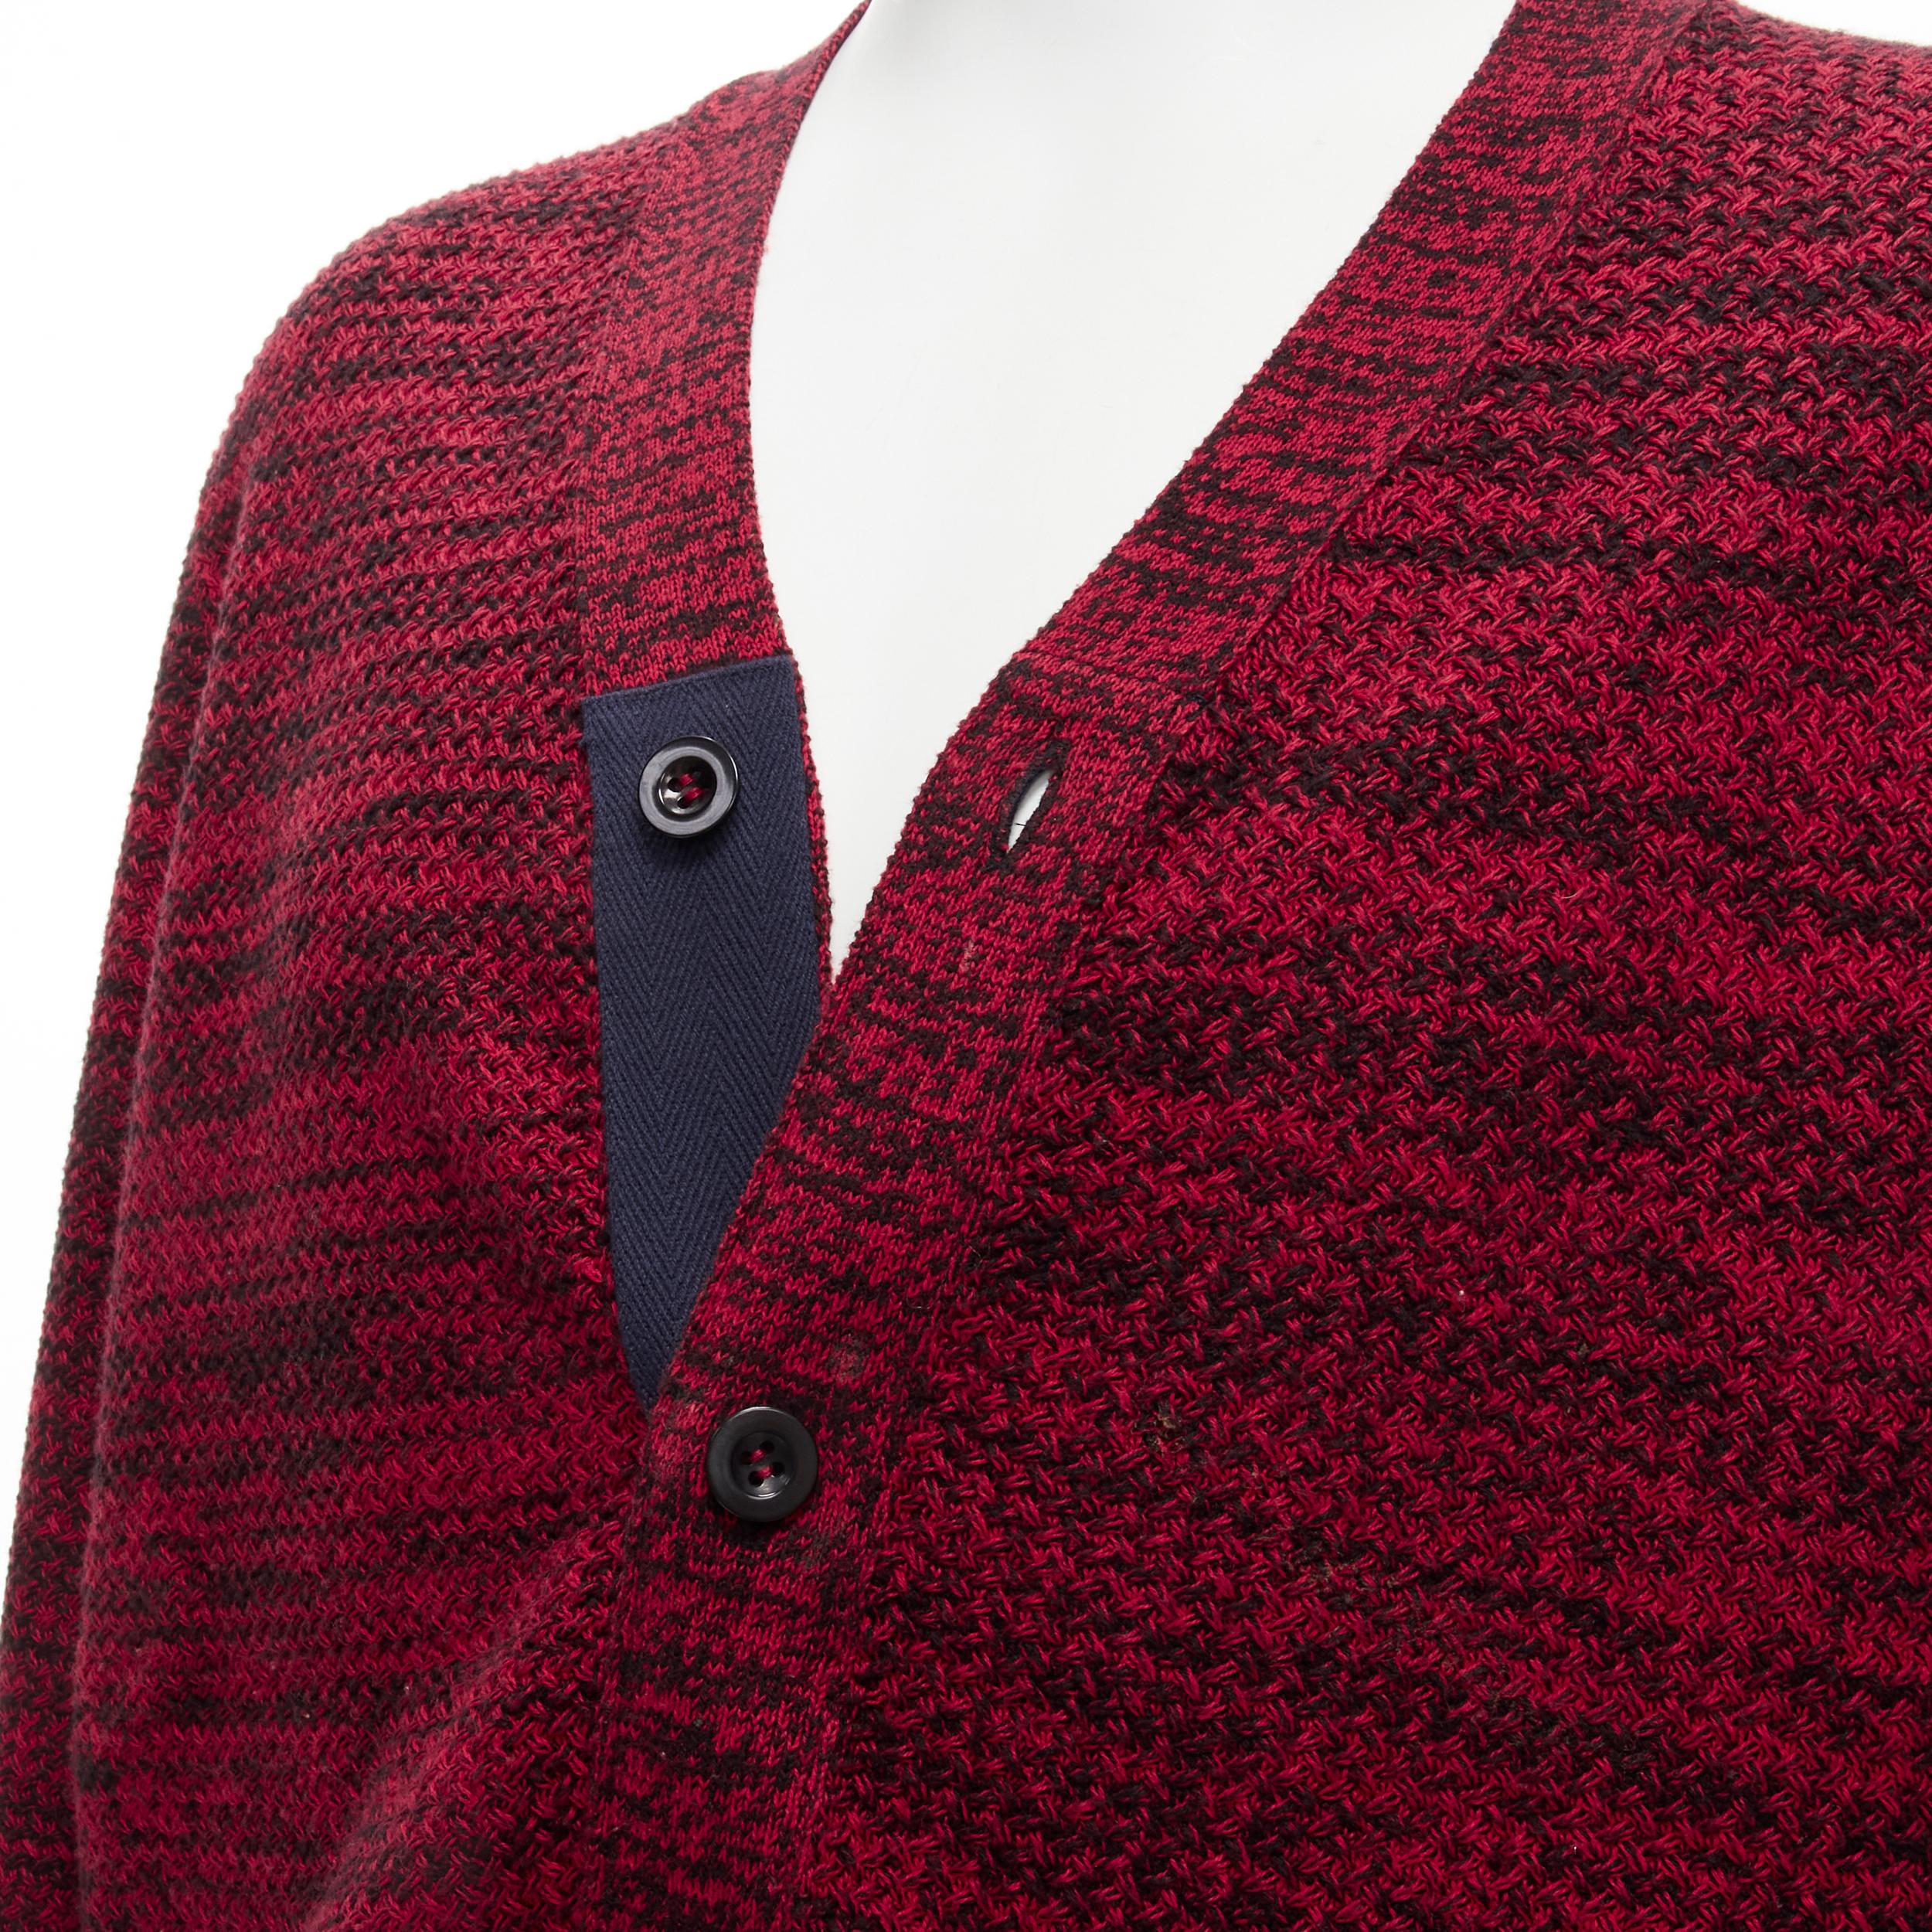 SACAI red black speckled cotton blend yarn chunky rib cardigan JP2 M
Reference: YNWG/A00107
Brand: Sacai
Designer: Chitose Abe
Material: Cotton, Blend
Color: Red, Black
Pattern: Solid
Closure: Button
Extra Details: Lined pockets.
Made in: